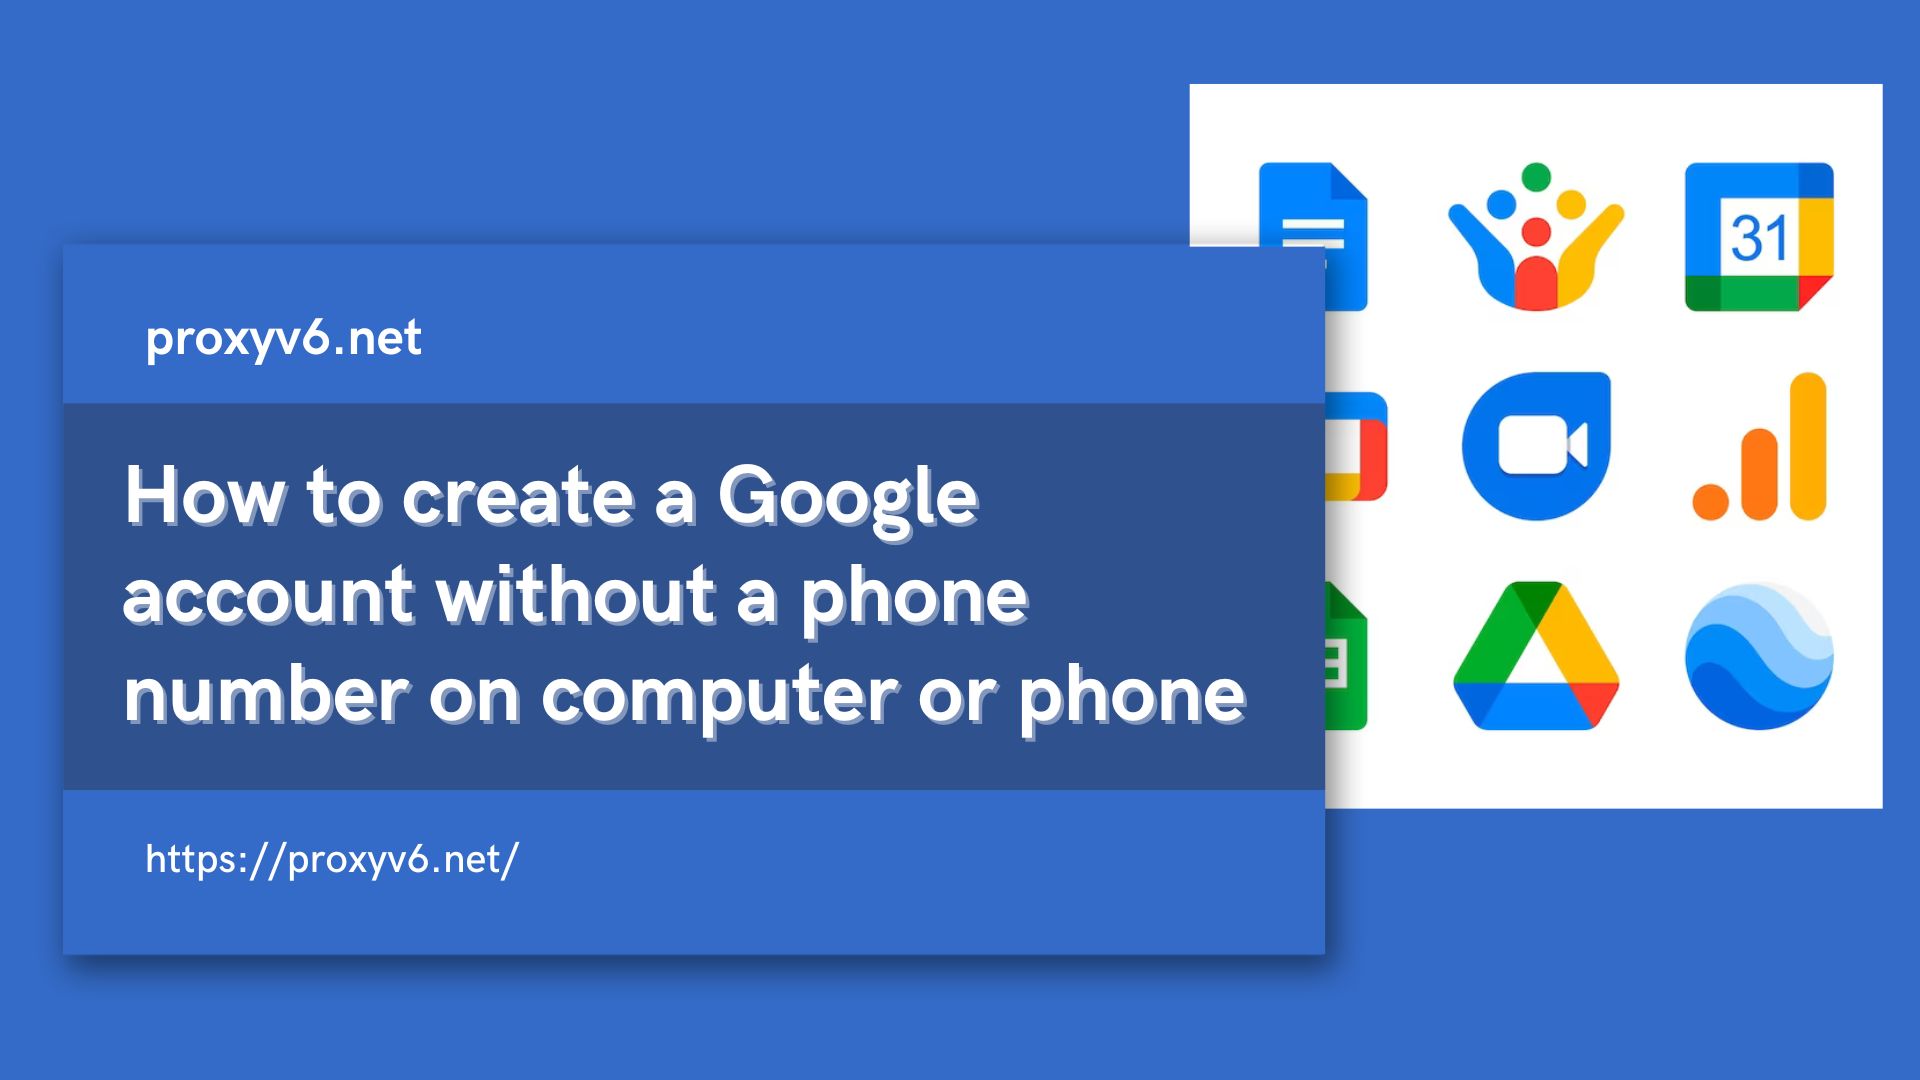 How to create a Google account without a phone number on computer or phone?